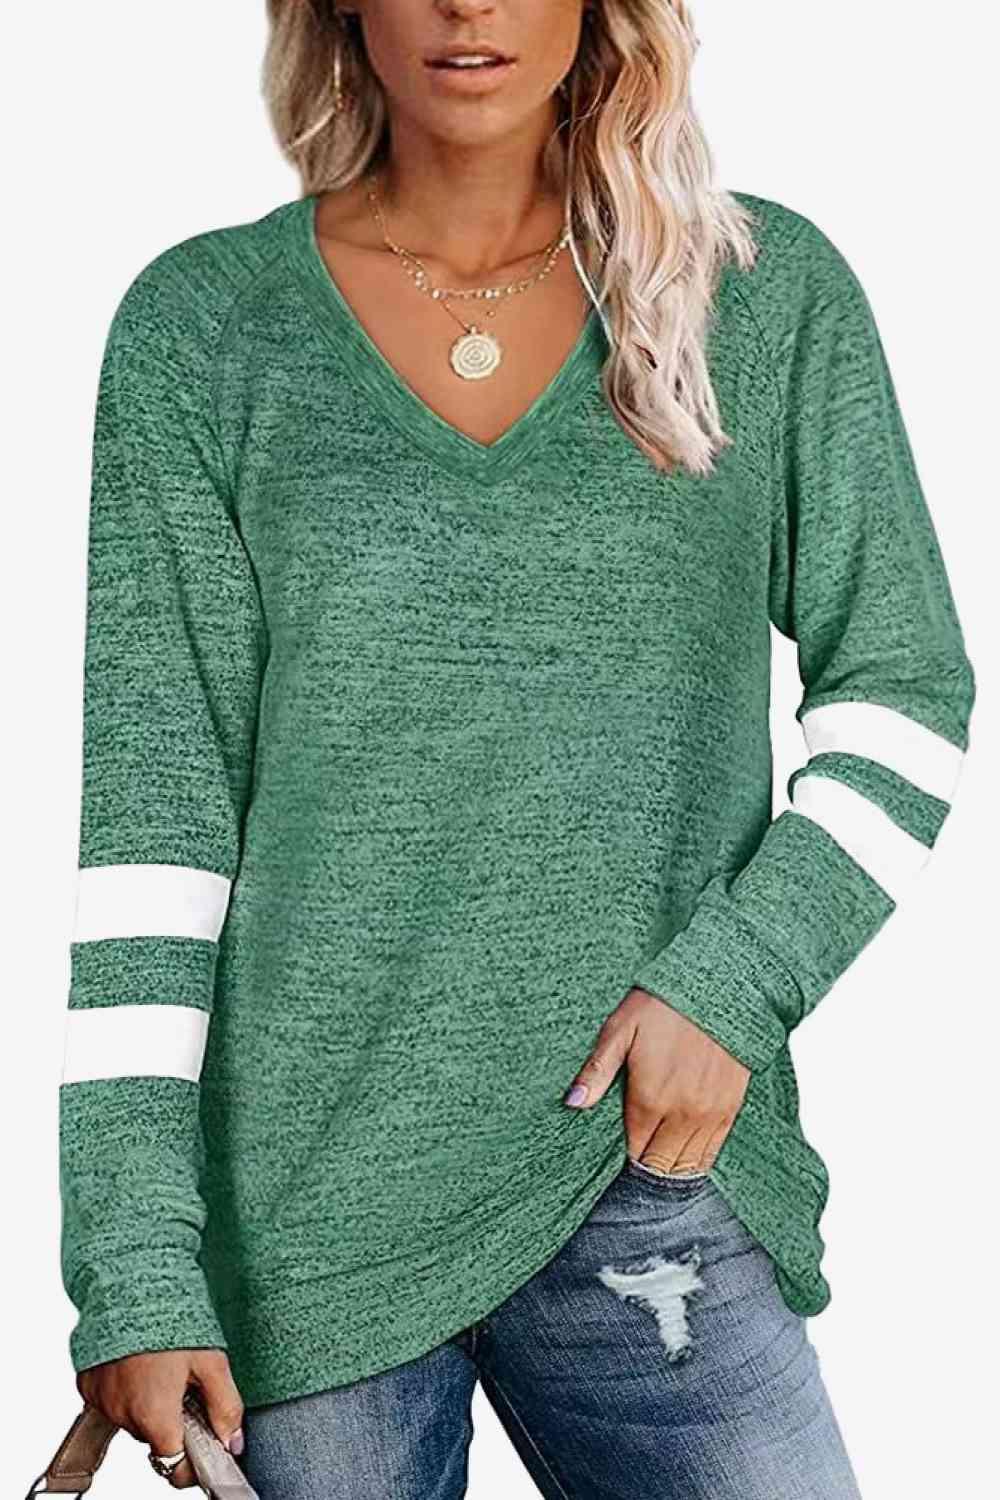 a woman wearing a green sweater with white stripes